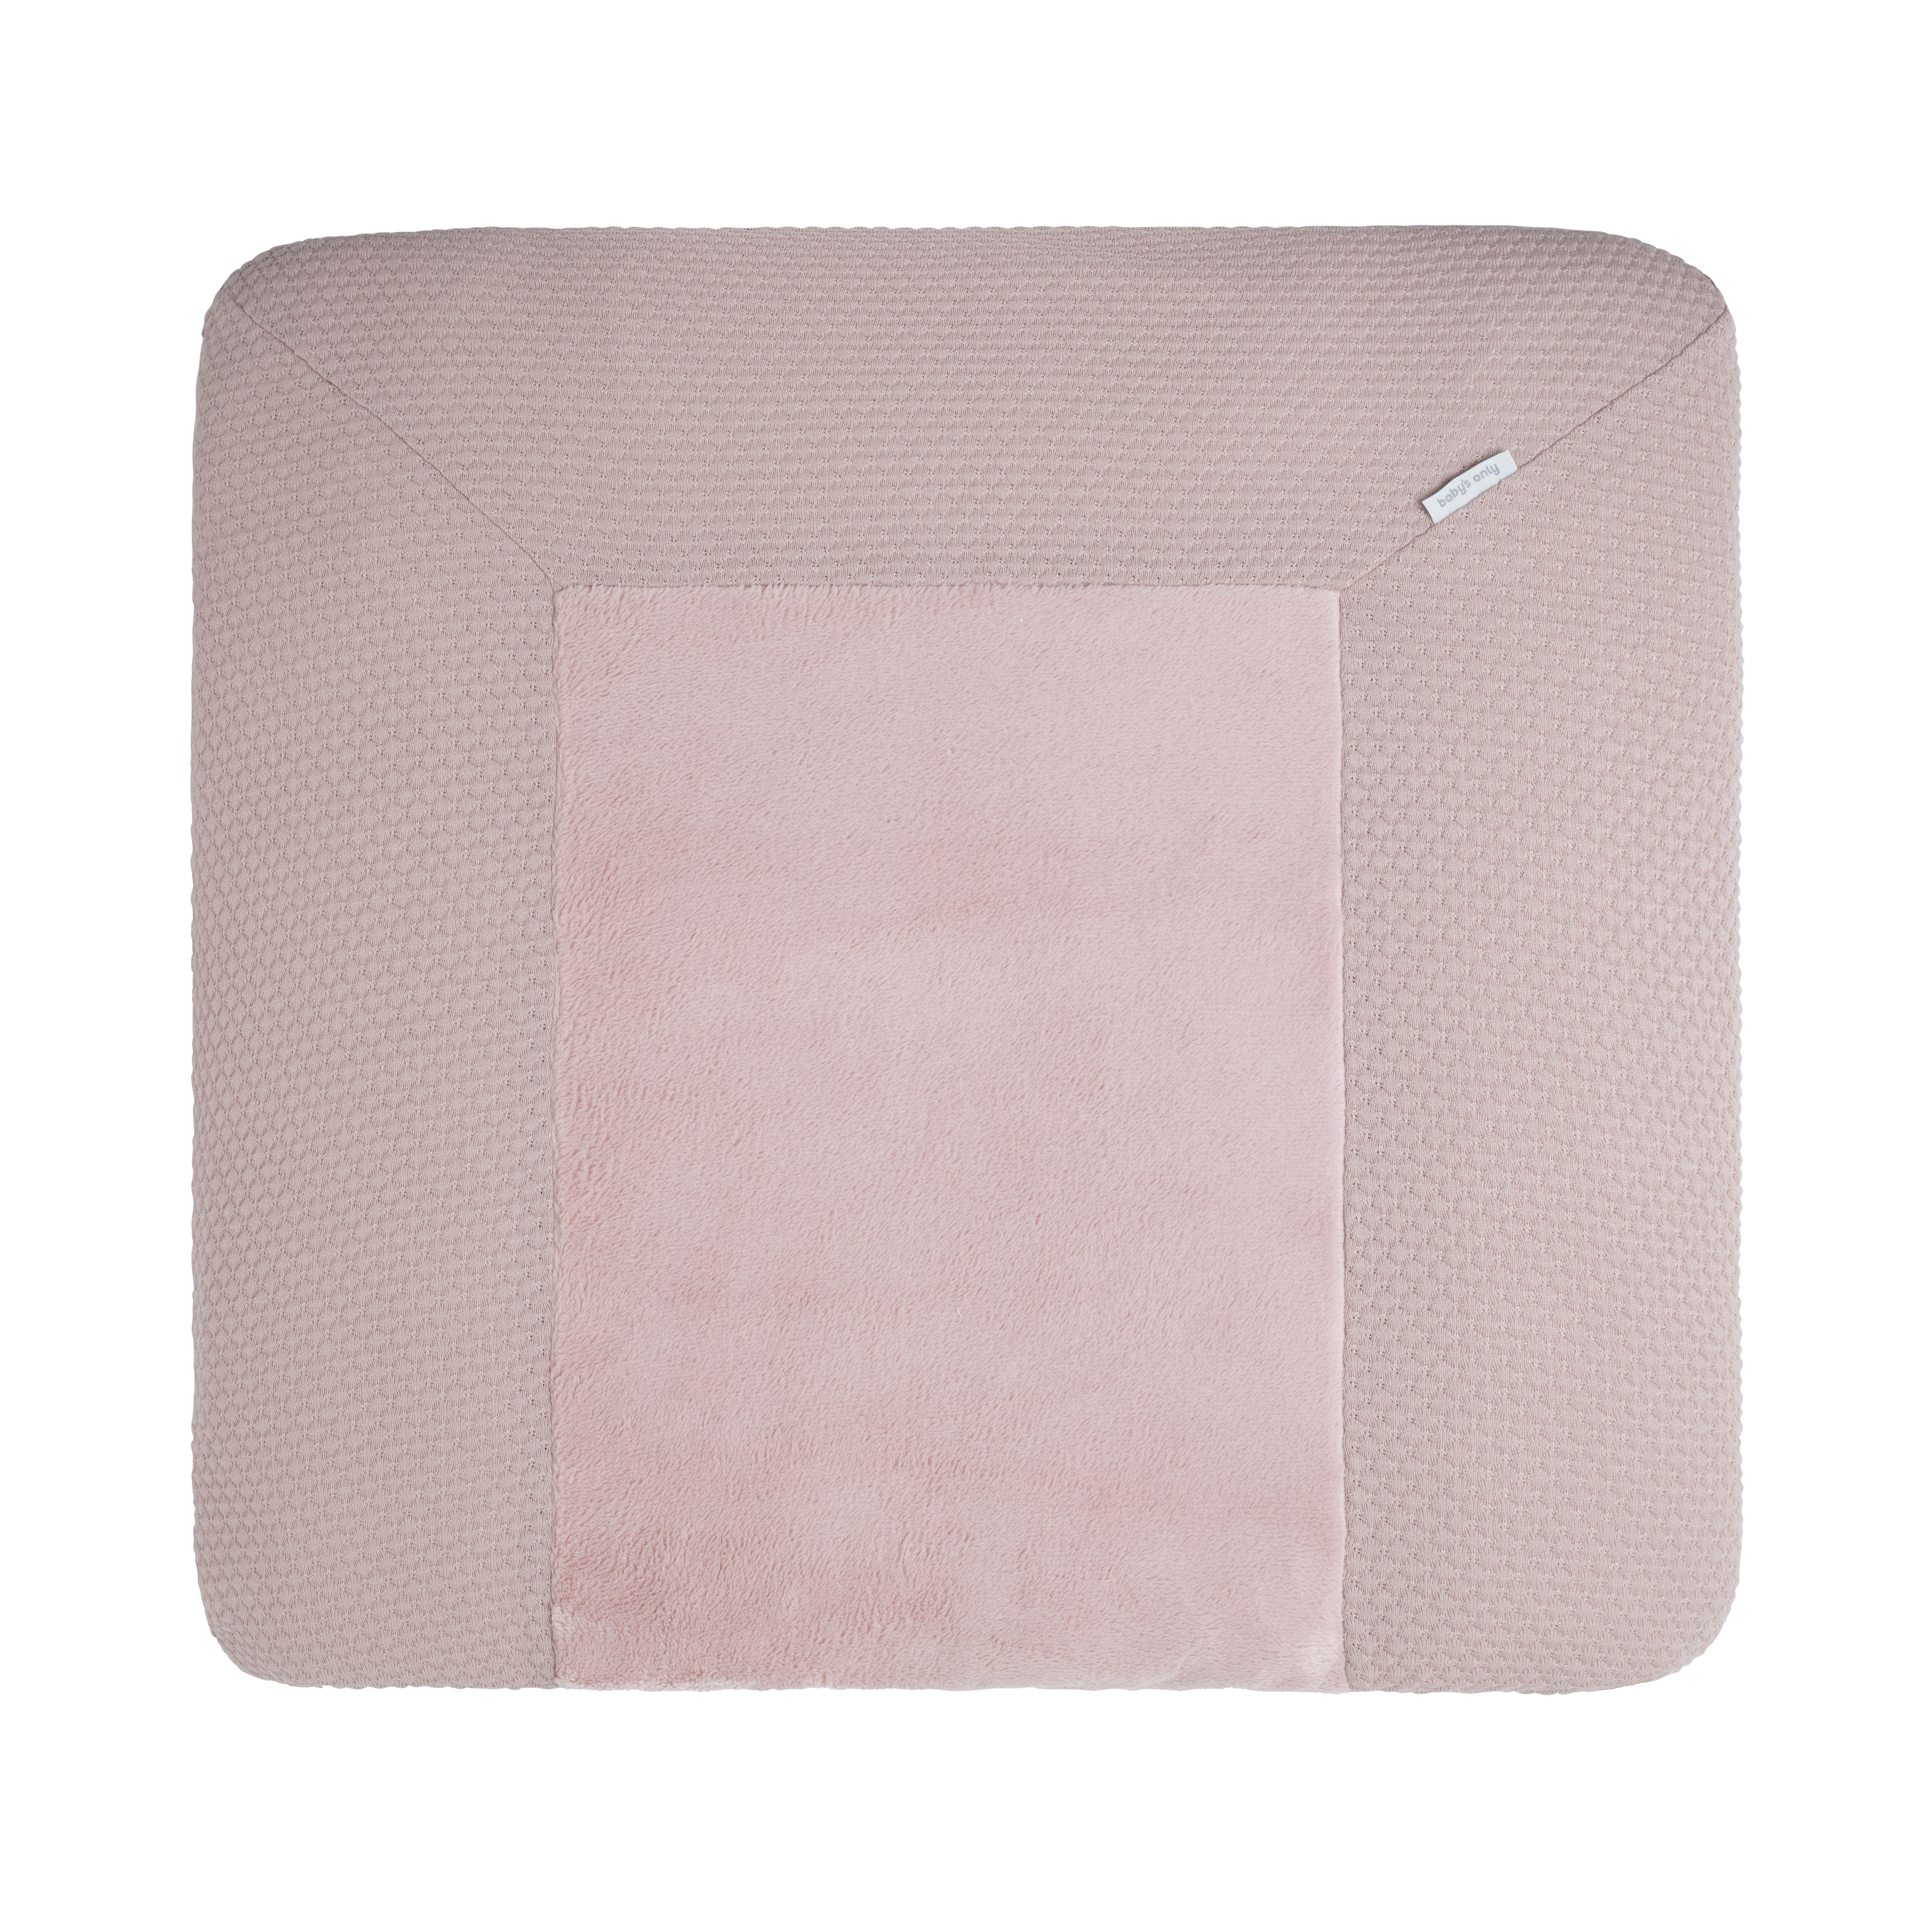 Changing pad cover Sky old pink - 75x85